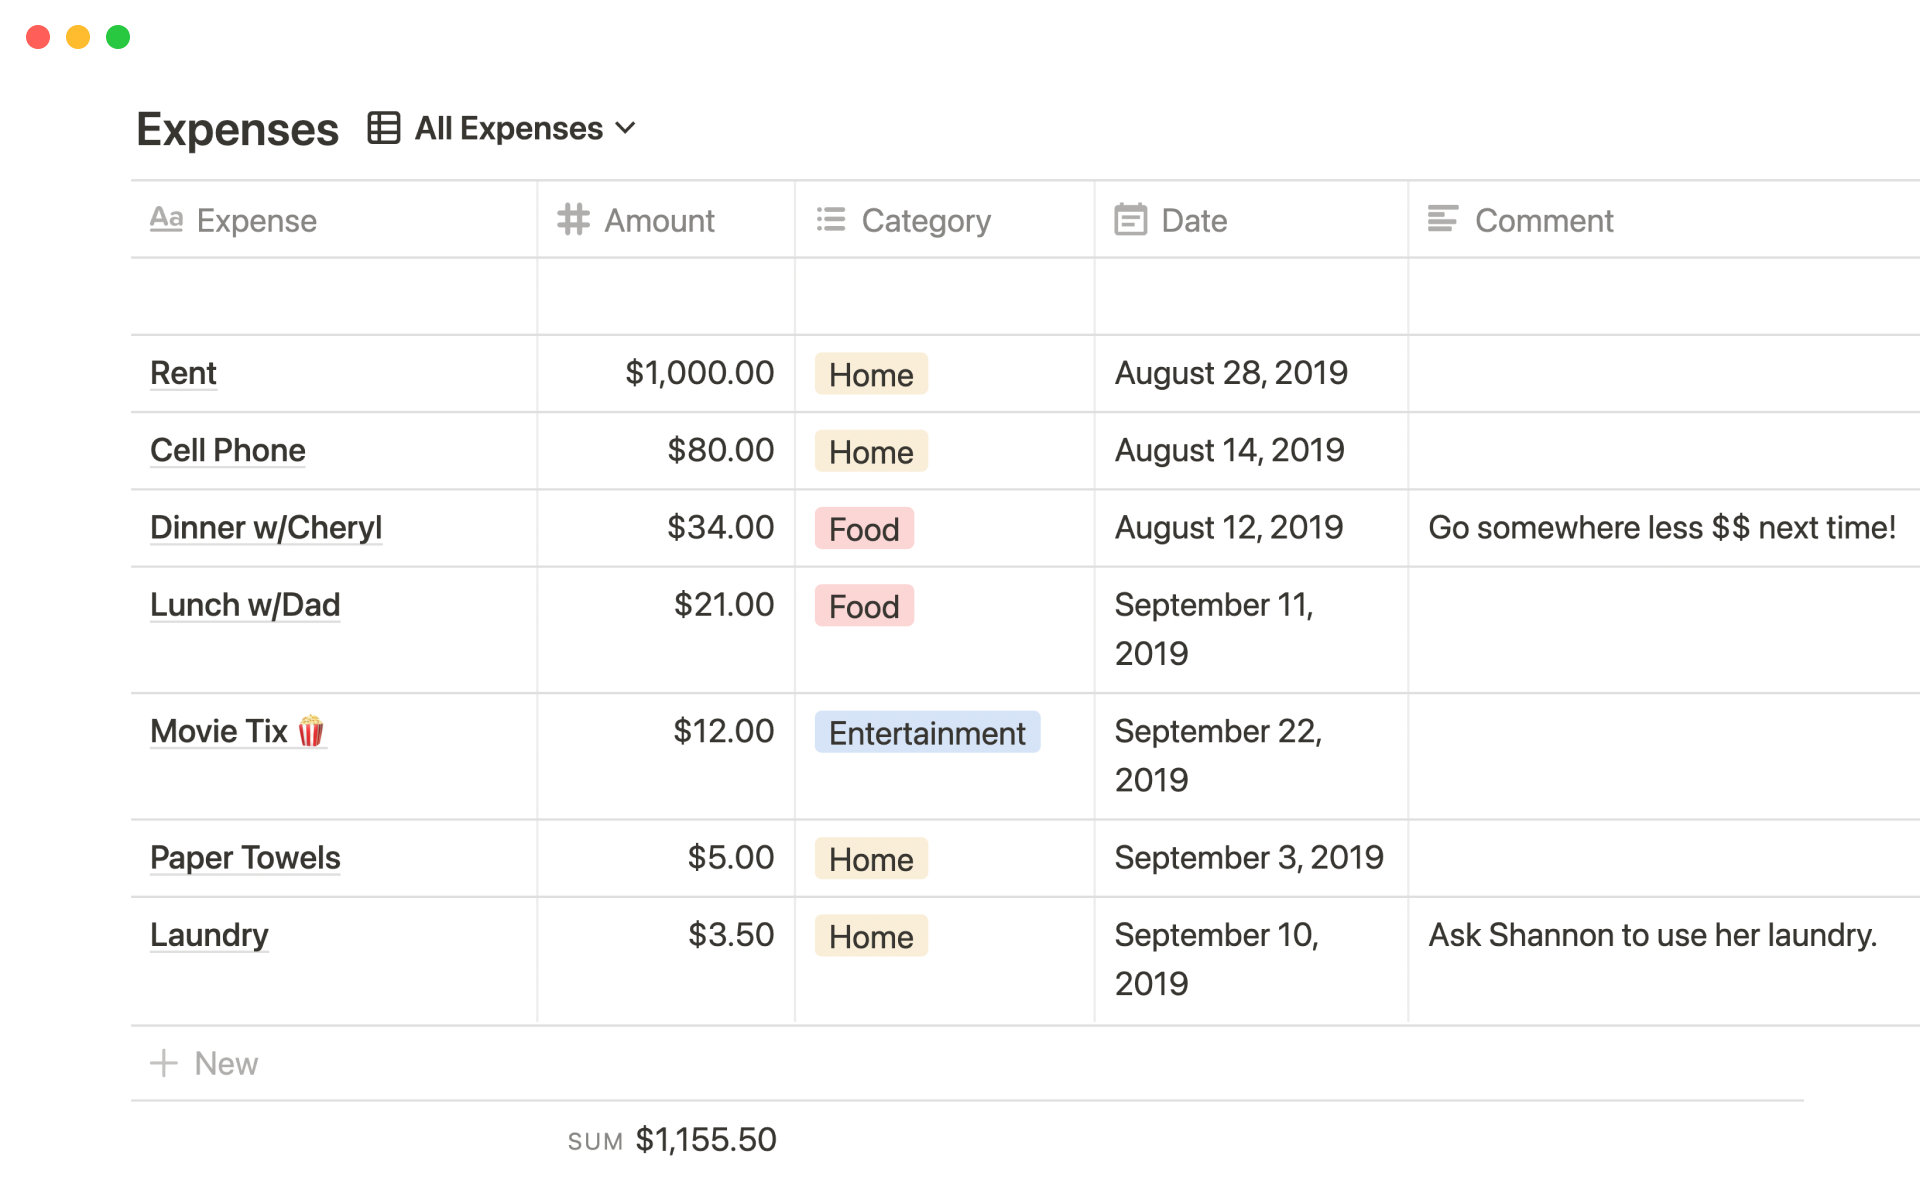 Discover your monthly financial flow with this intuitive budgeting template. Simply list all your income sources and their amounts in the Income table, and track your spending in the Expenses table. Easily find the total sum at the bottom of each table, giving you a snapshot.